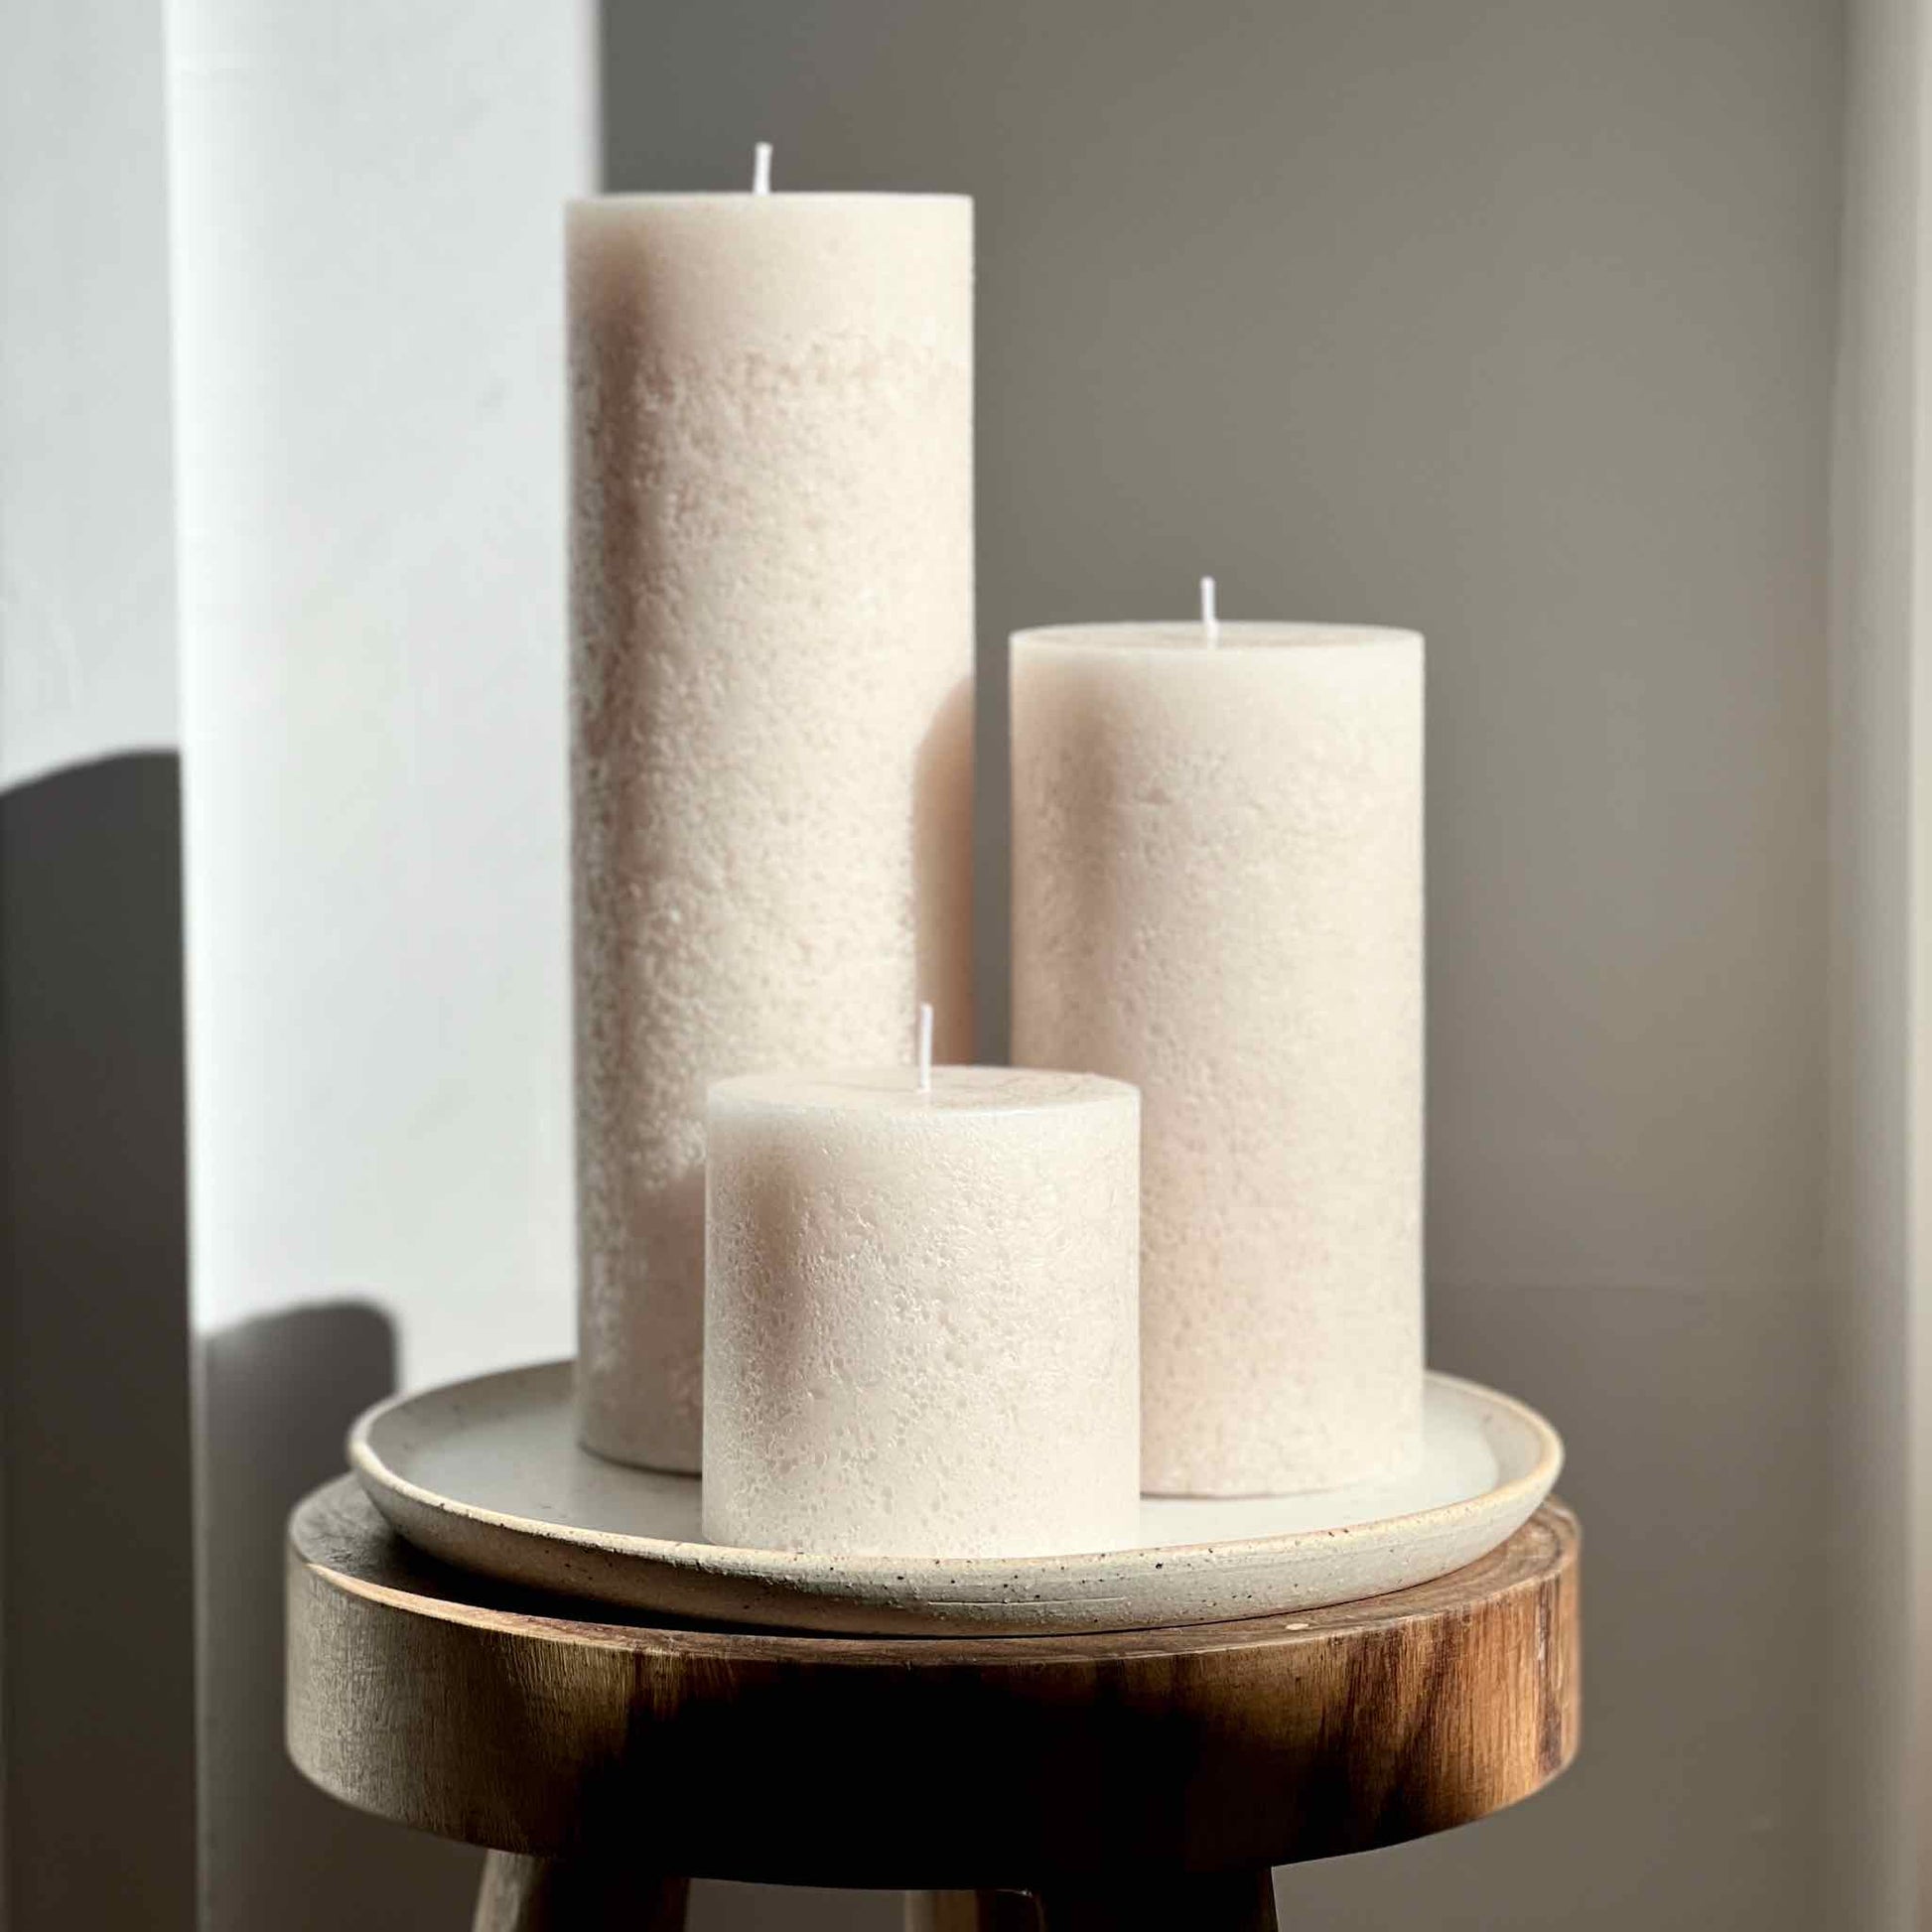 Ivory coloured textured pillar candles